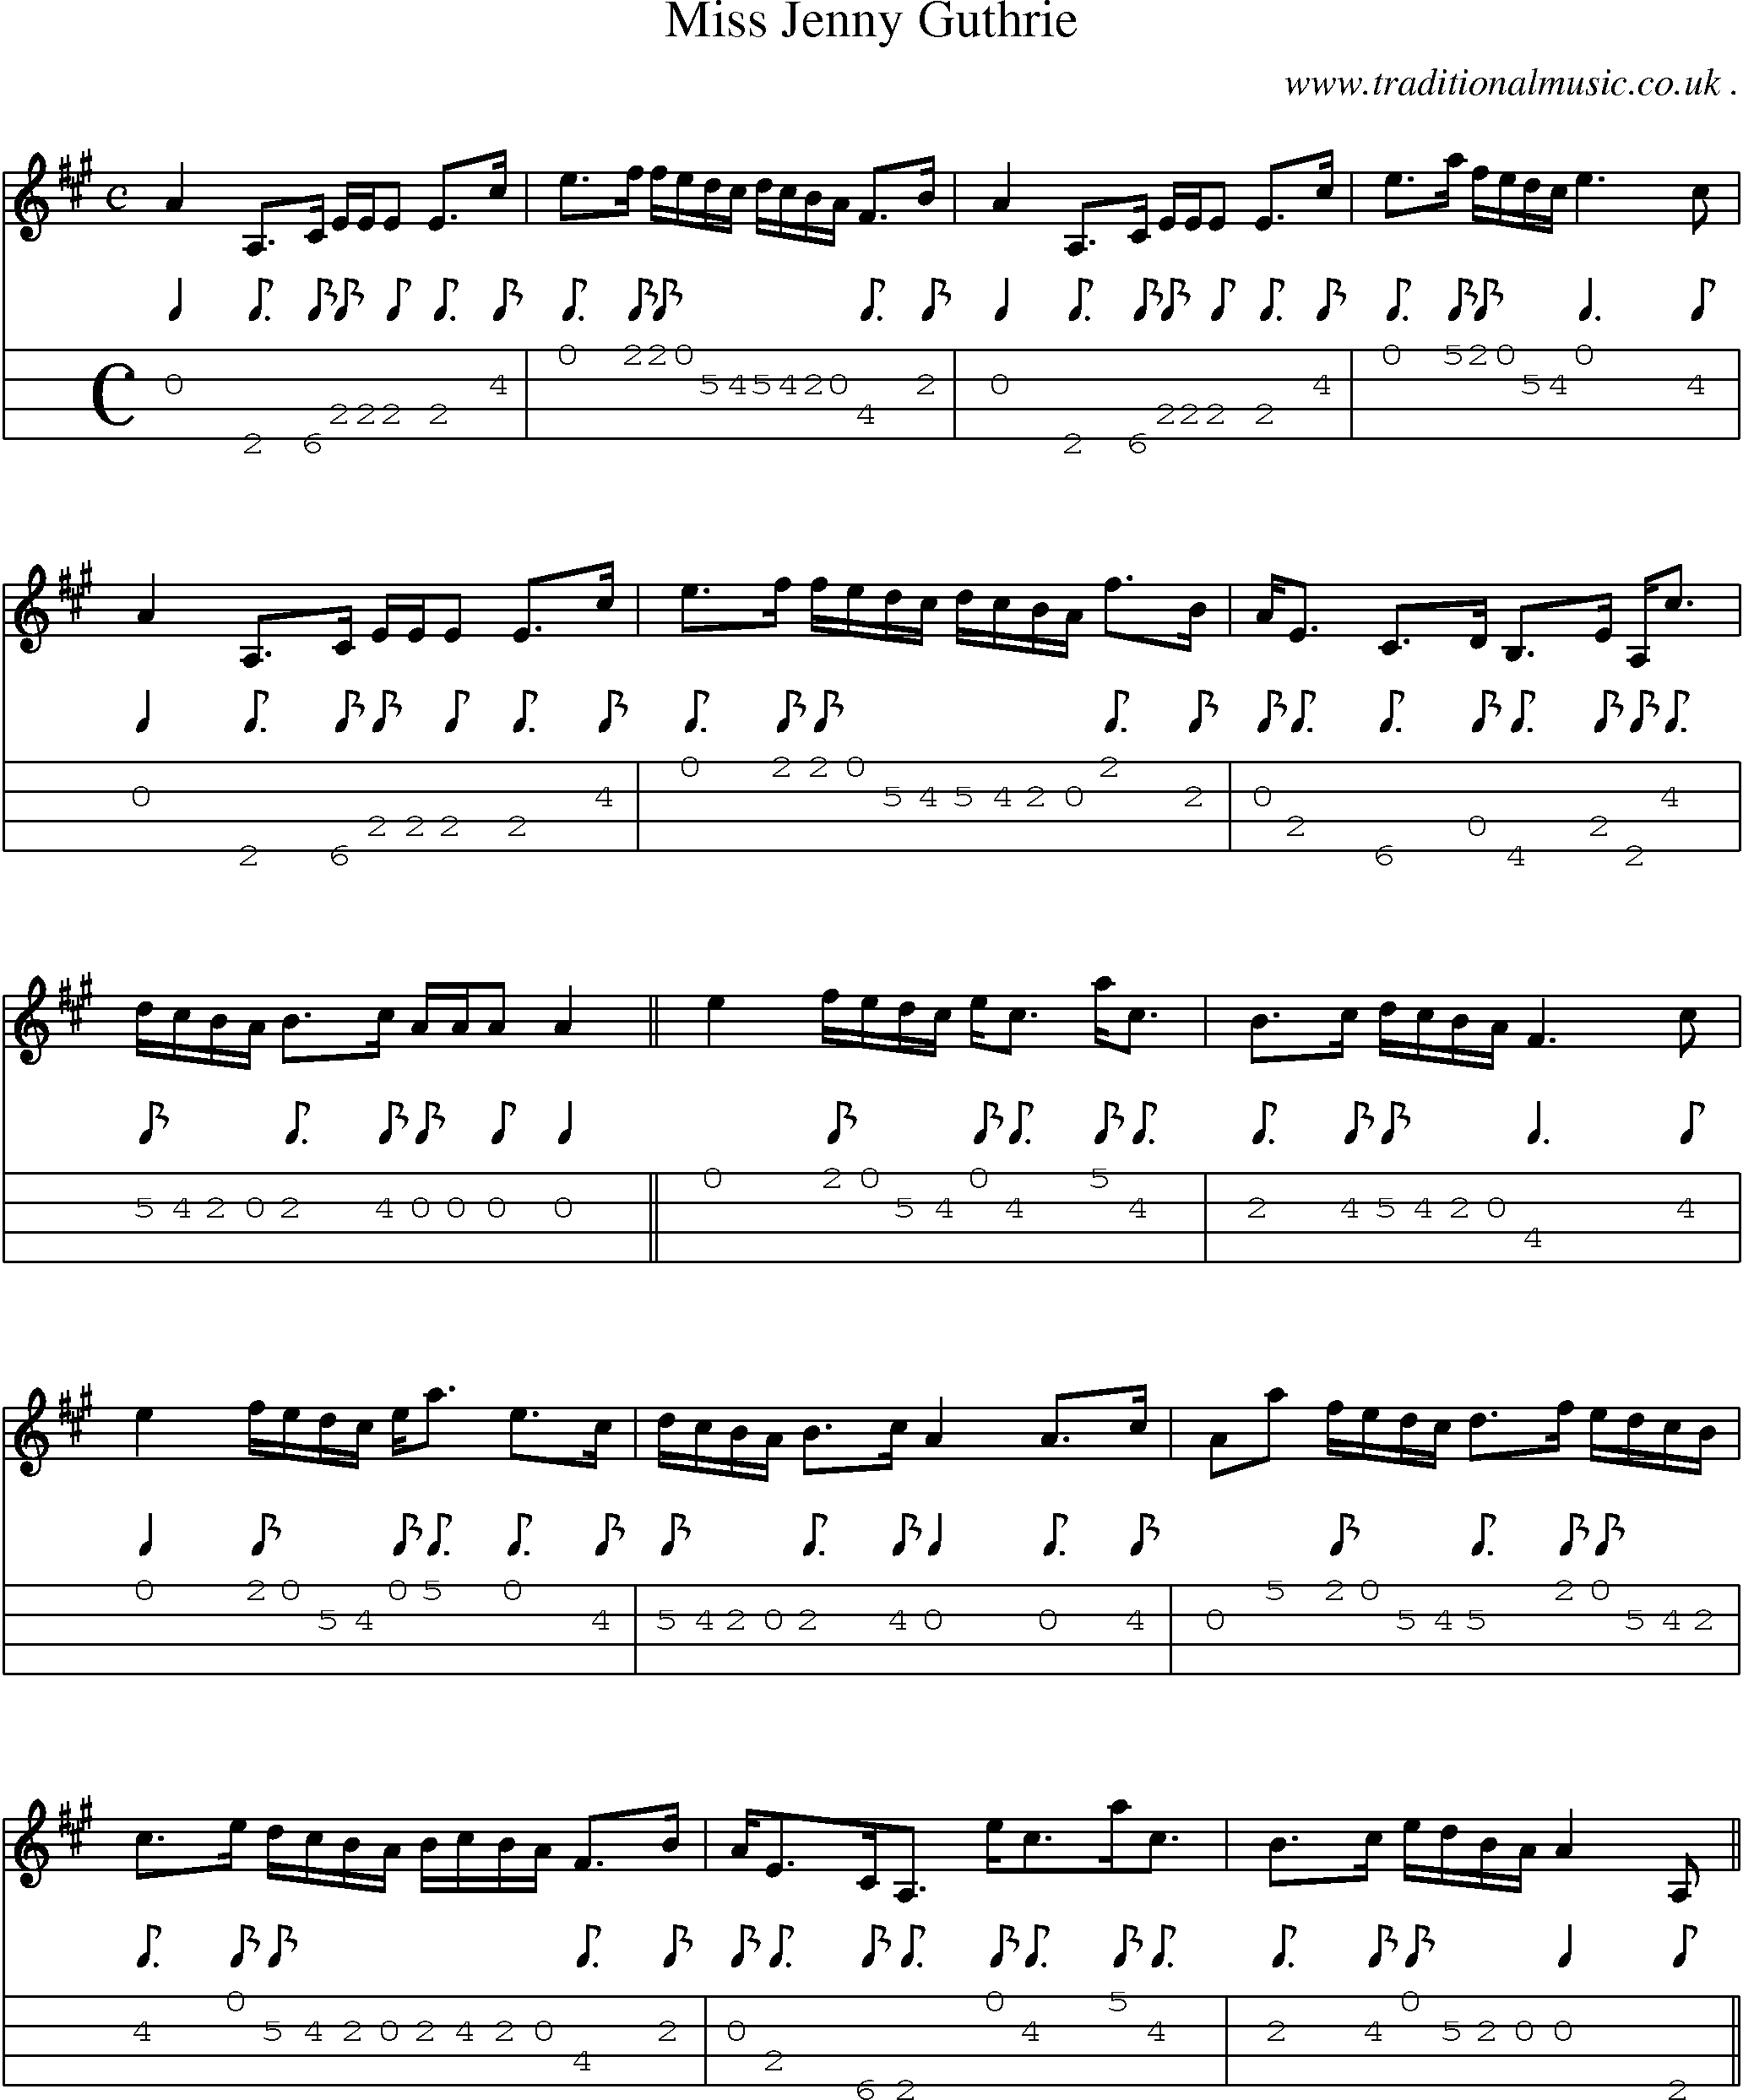 Sheet-music  score, Chords and Mandolin Tabs for Miss Jenny Guthrie